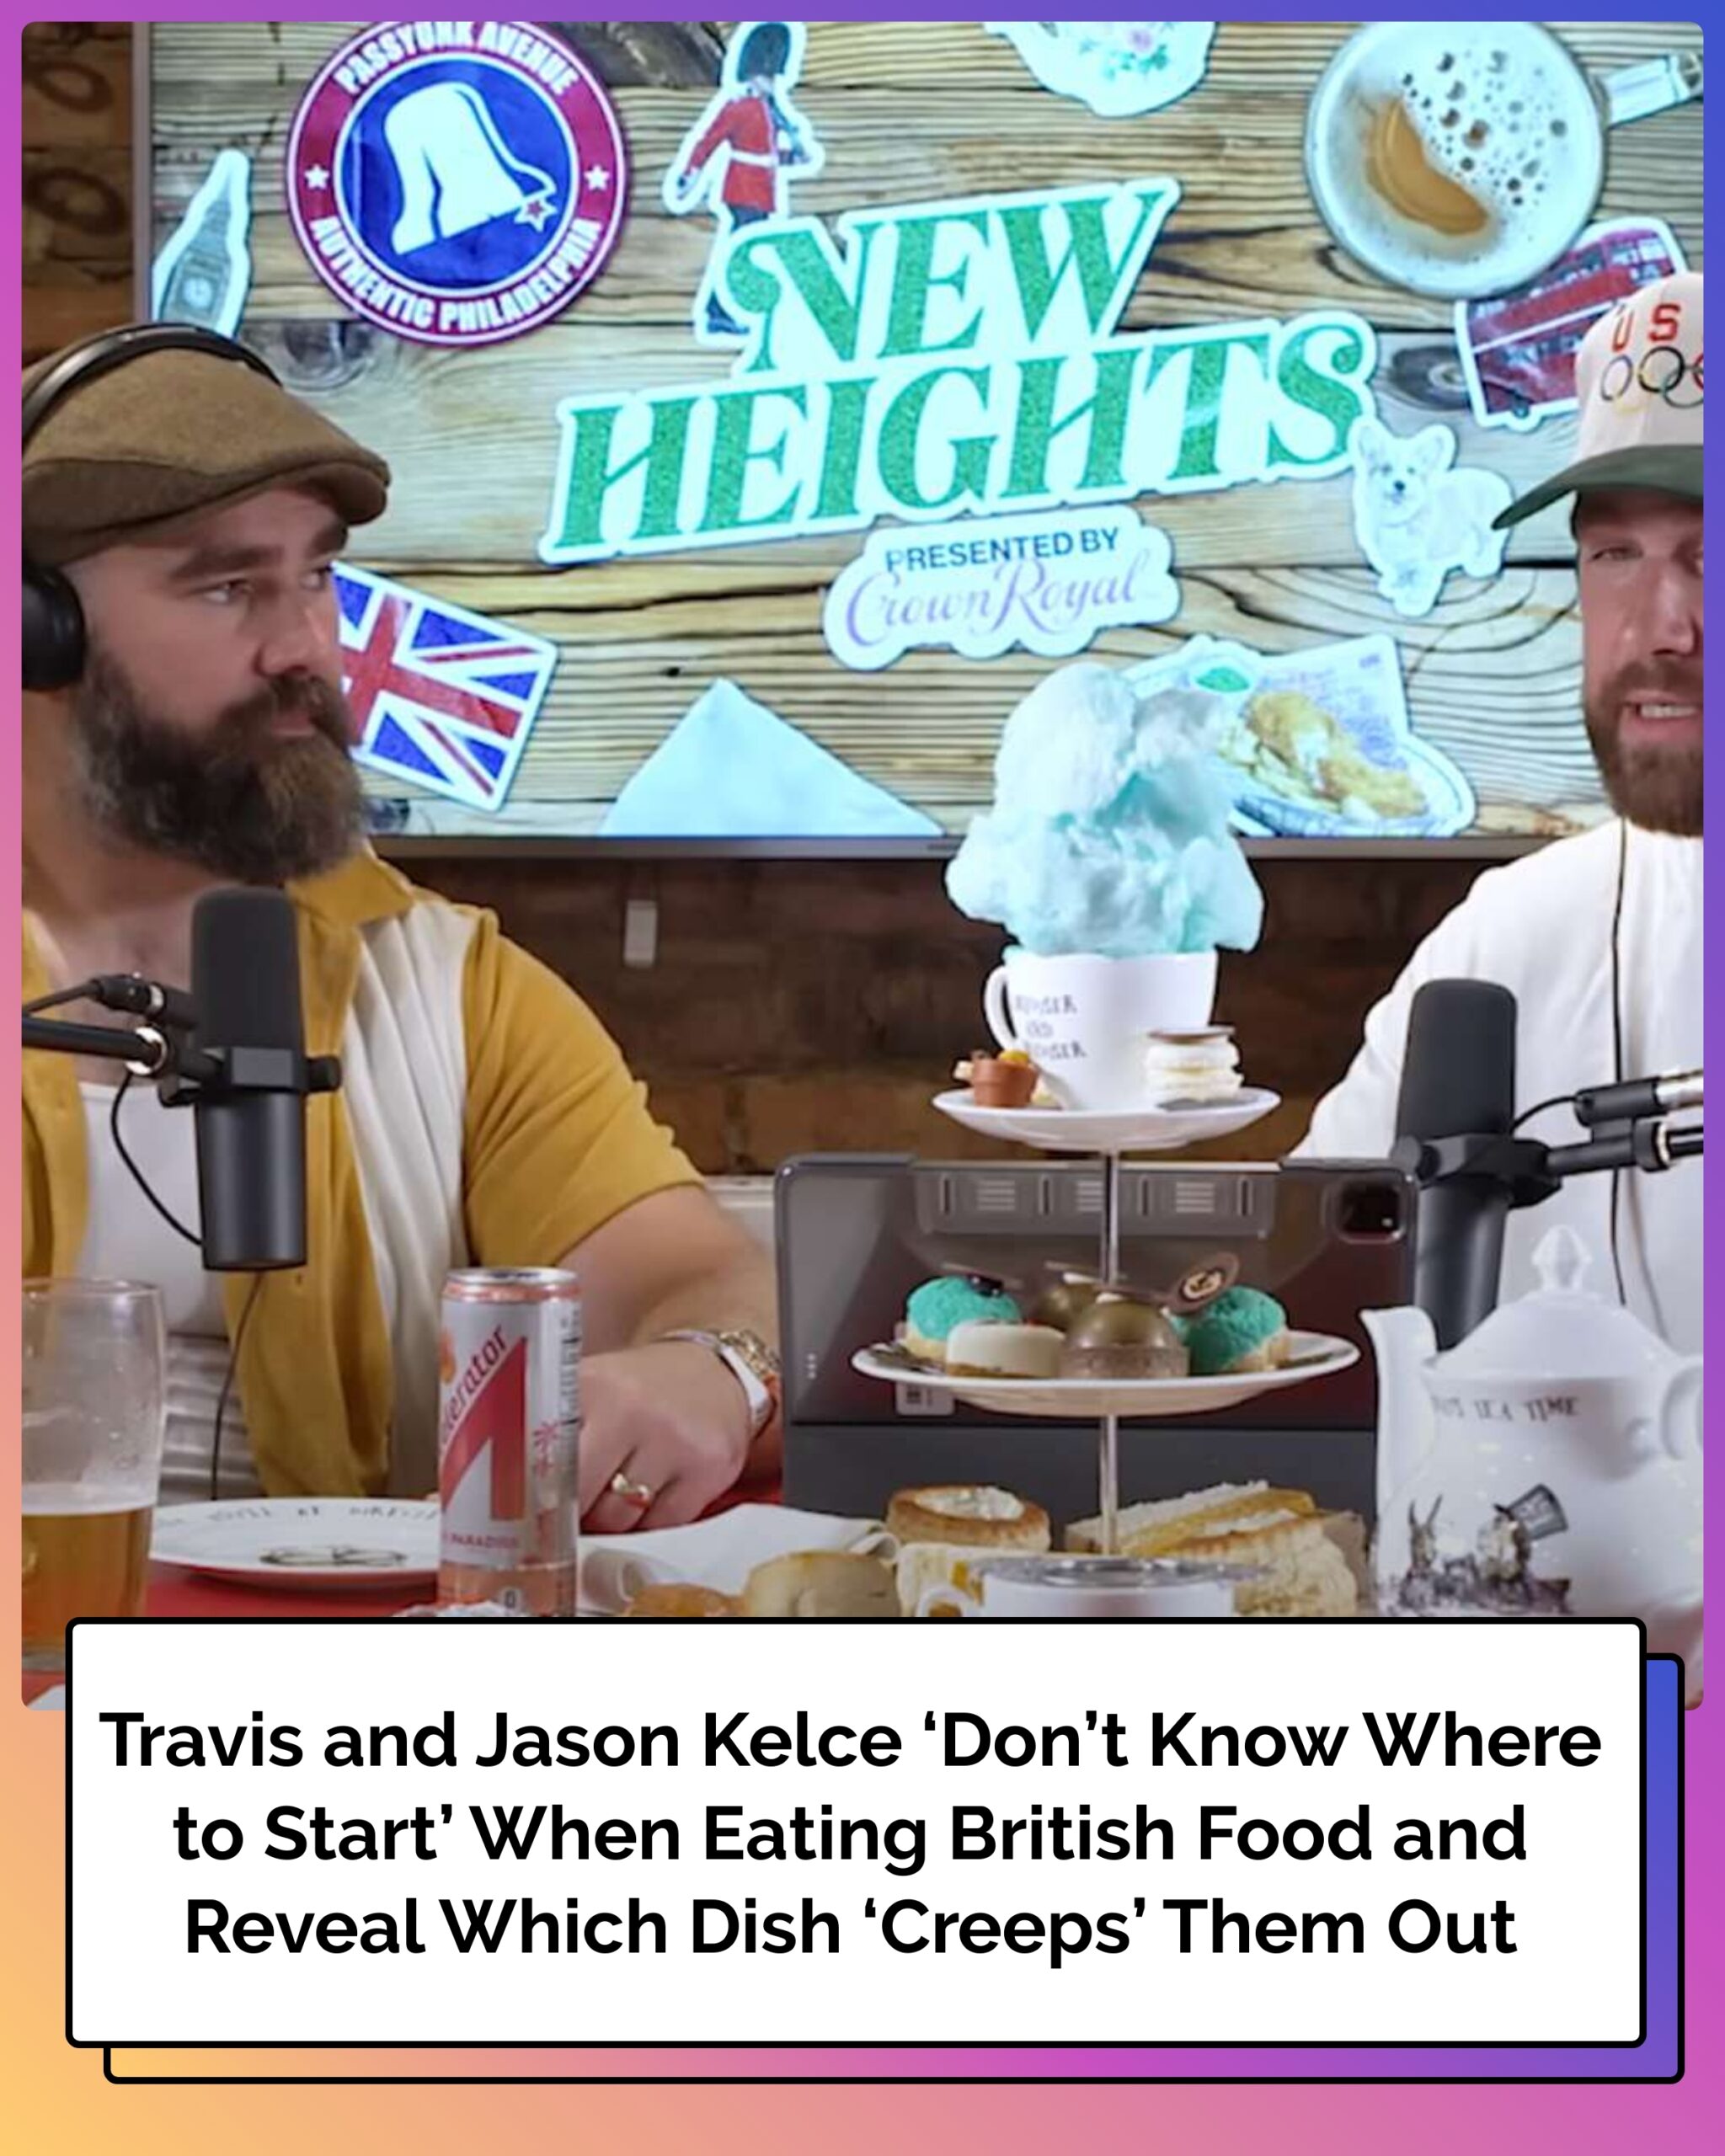 Travis and Jason Kelce ‘Don’t Know Where to Start’ When Eating British Food and Reveal Which Dish ‘Creeps’ Them Out